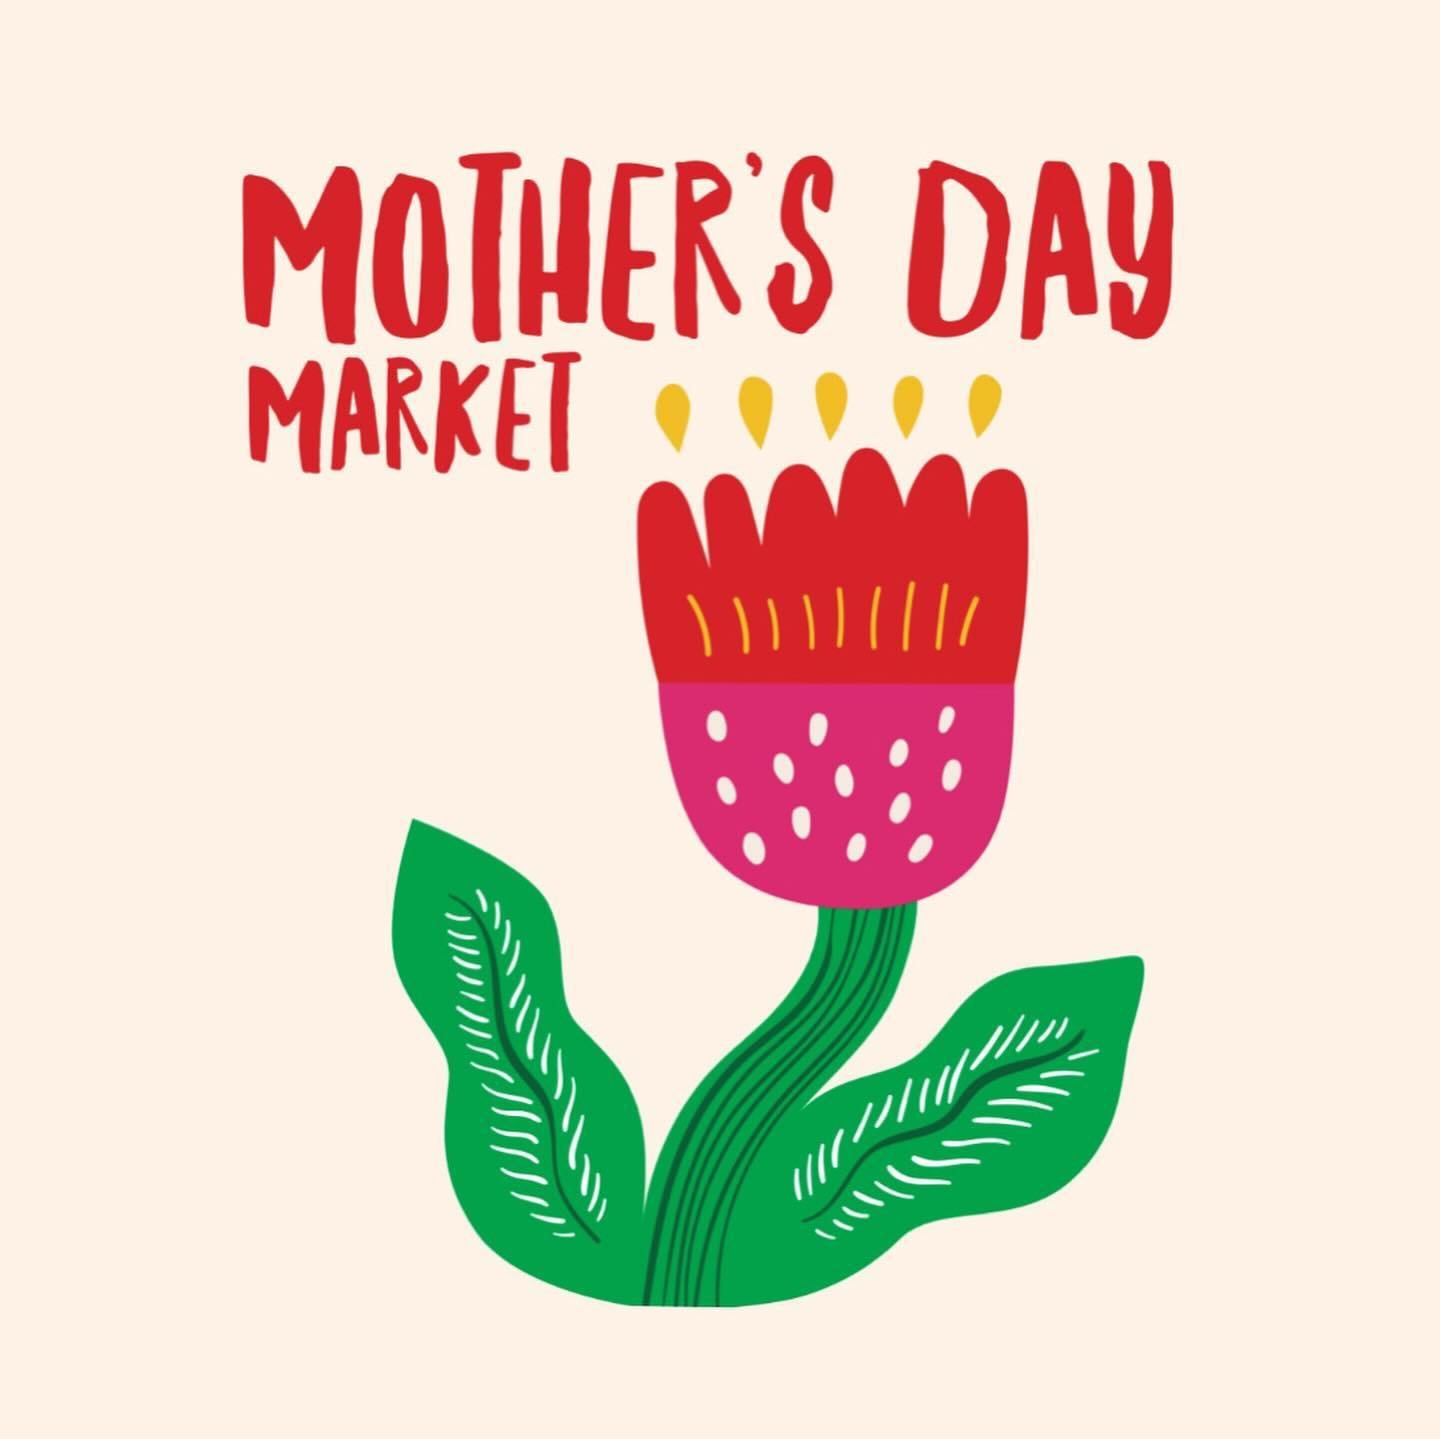 See you tomorrow at the mini markets outside @cassiusespresso &amp; @scoopsdesign in Chatswood West (Greville St) from 9am-1pm! 

Bring your umbrella and enjoy a coffee as you shop some stationery and home goodies, flowers, jewellery and more. ☕️

Ma